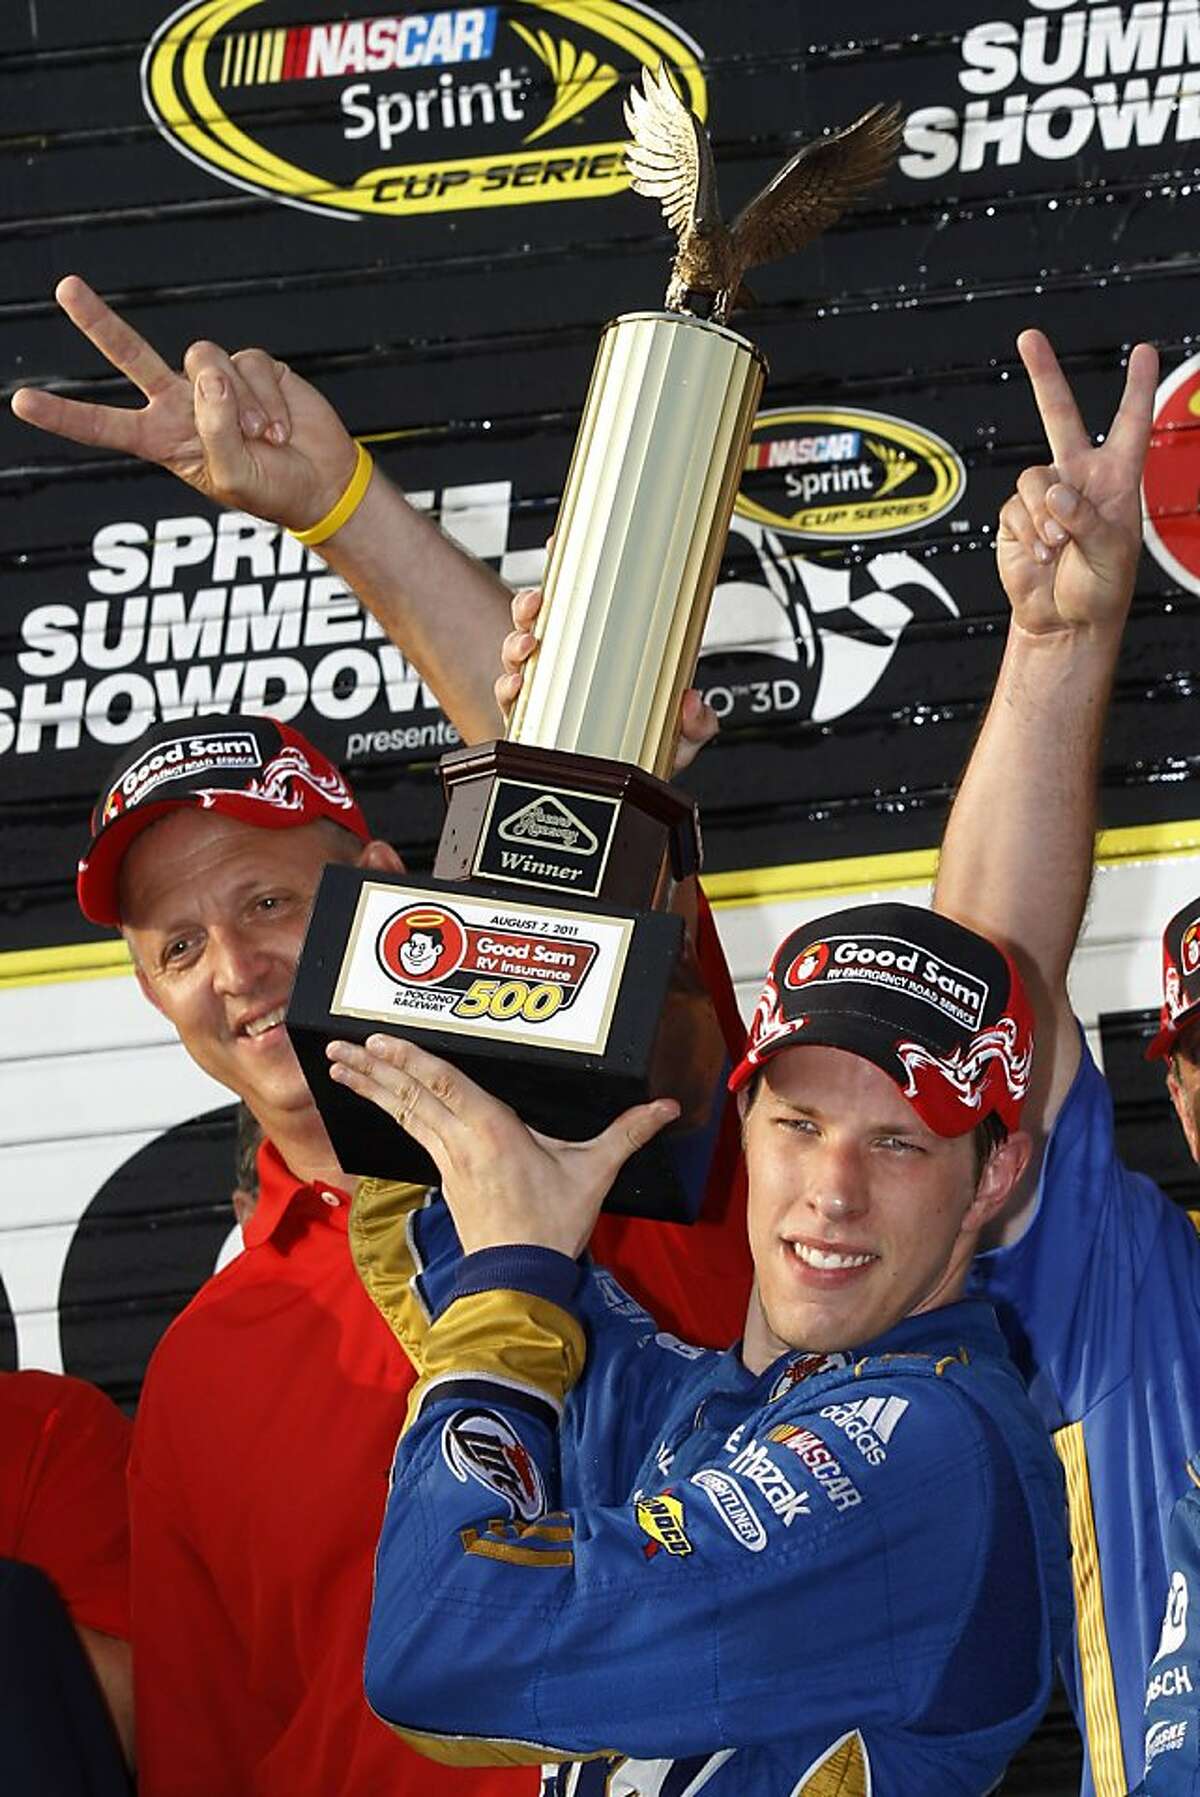 Brad Keselowski holds the trophy in victory lane after winning the NASCAR Sprint Cup Series auto race, Sunday, Aug. 7, 2011, at Pocono Raceway in Long Pond, Pa.